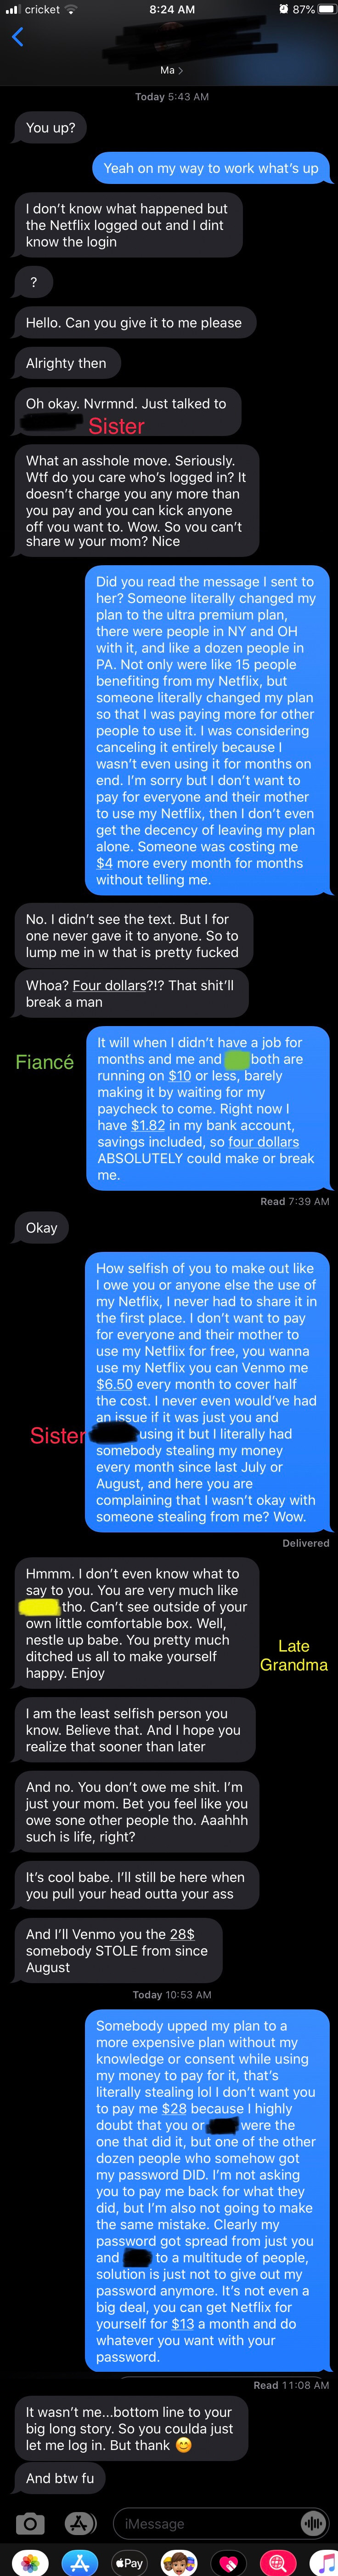 Someone gets upset with her brother for changing his Netflix password after someone upgraded his account without permission